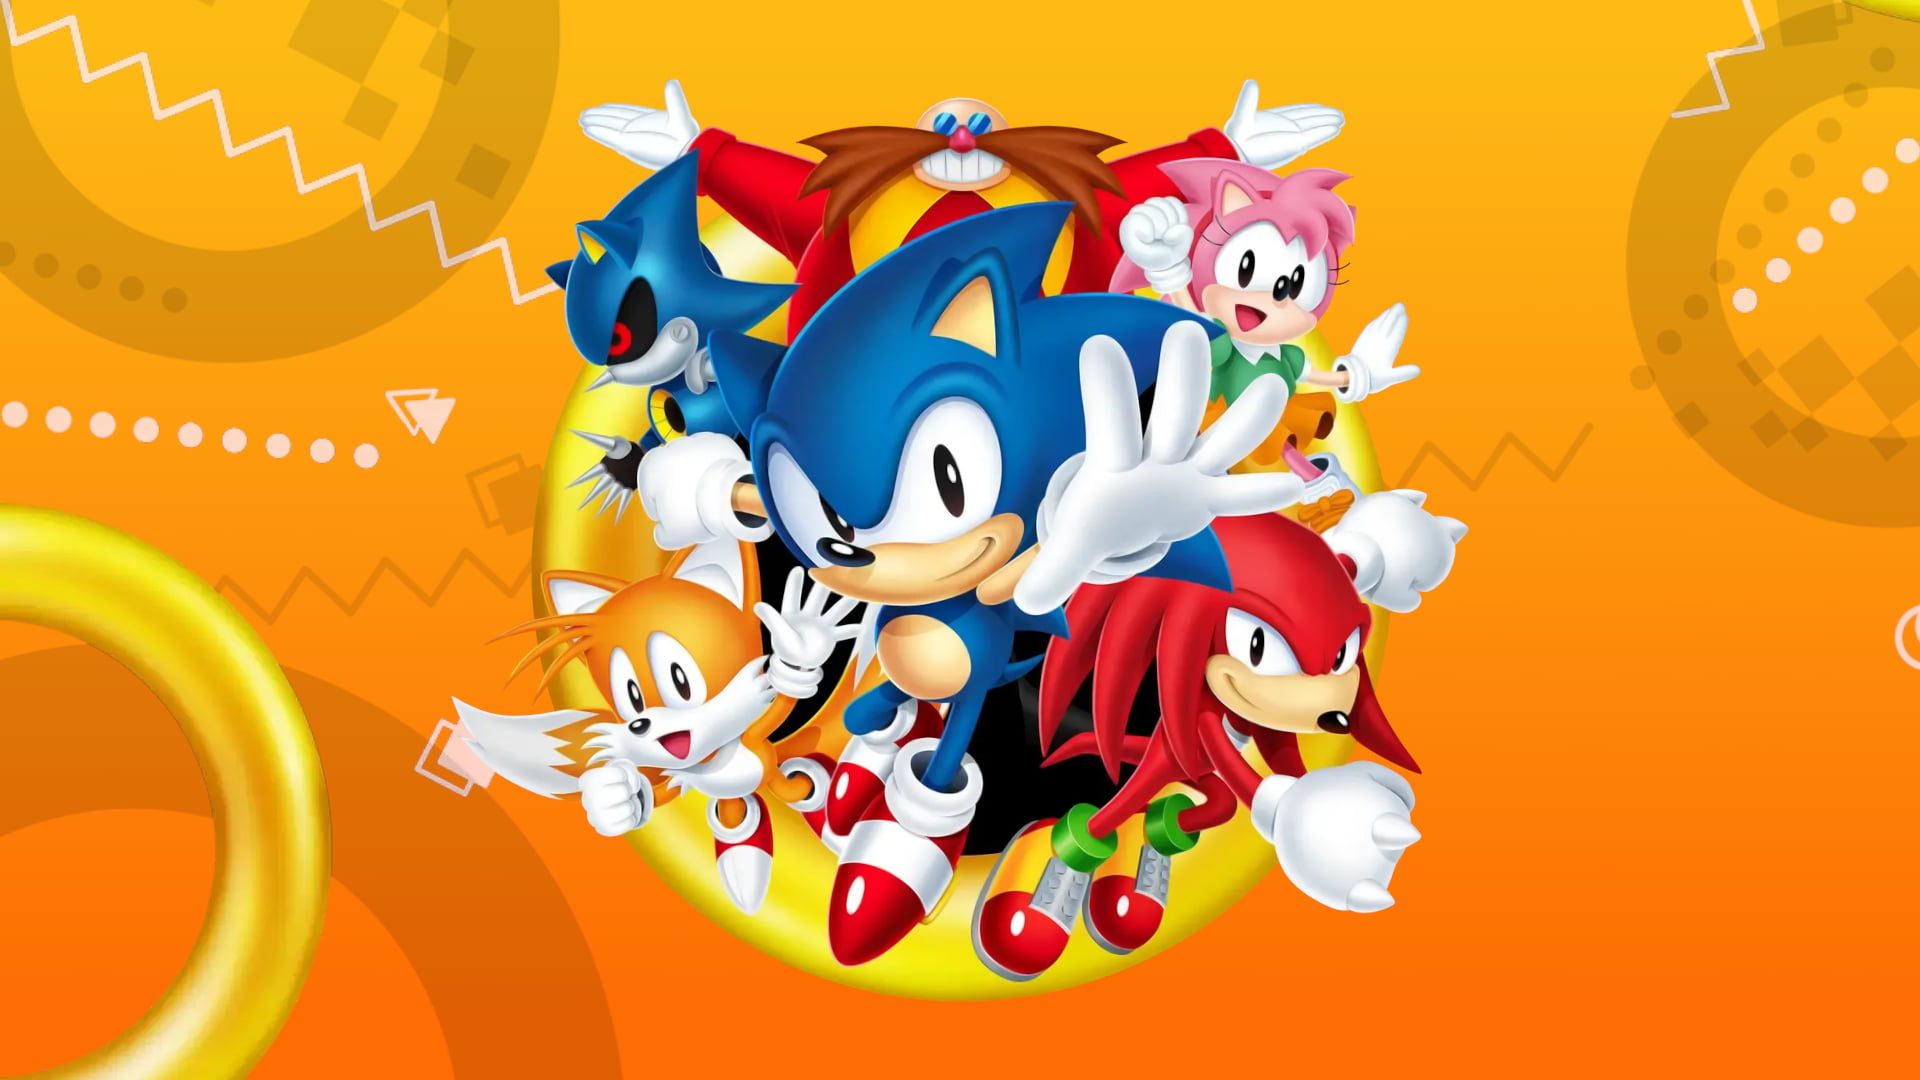 Sonic, Sonic 2, Sonic 3, sonic origins, video game art, video game characters